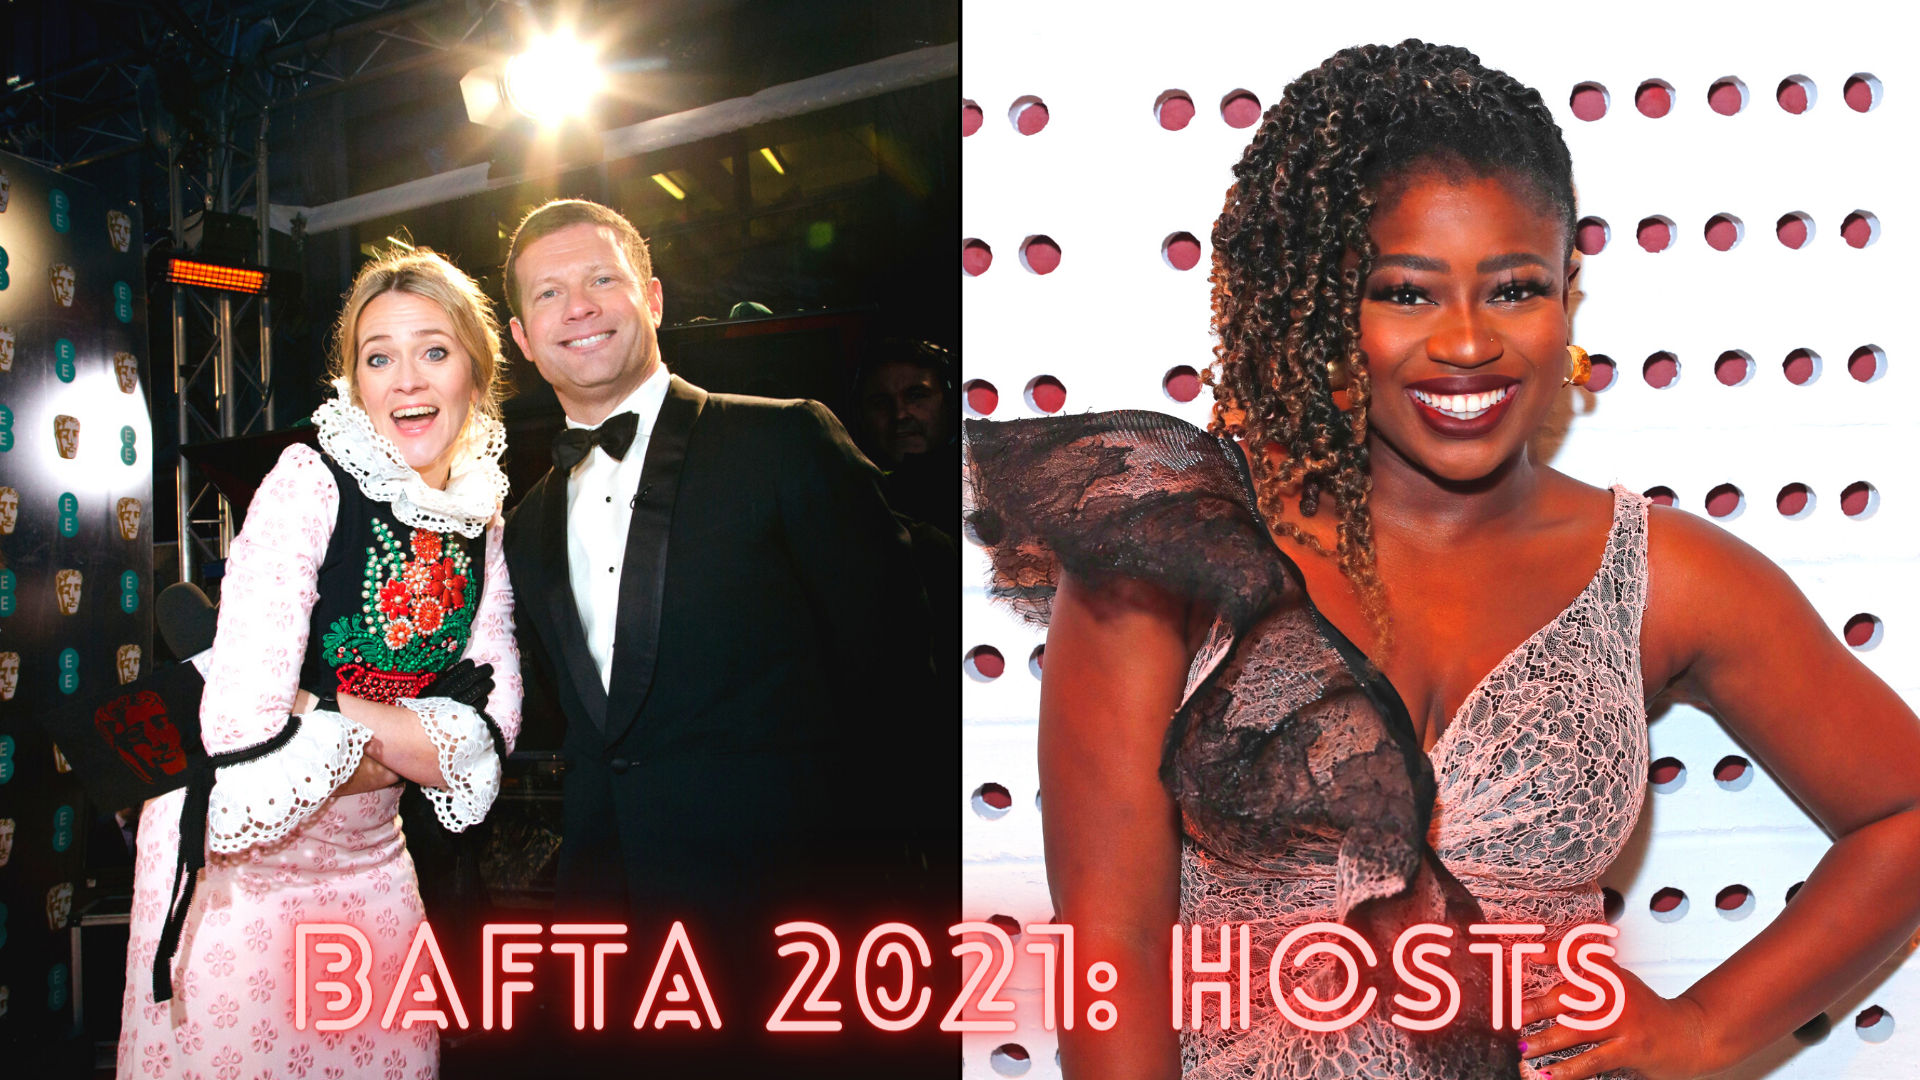 BAFTA 2021: A look at the hosts for the starry awards night